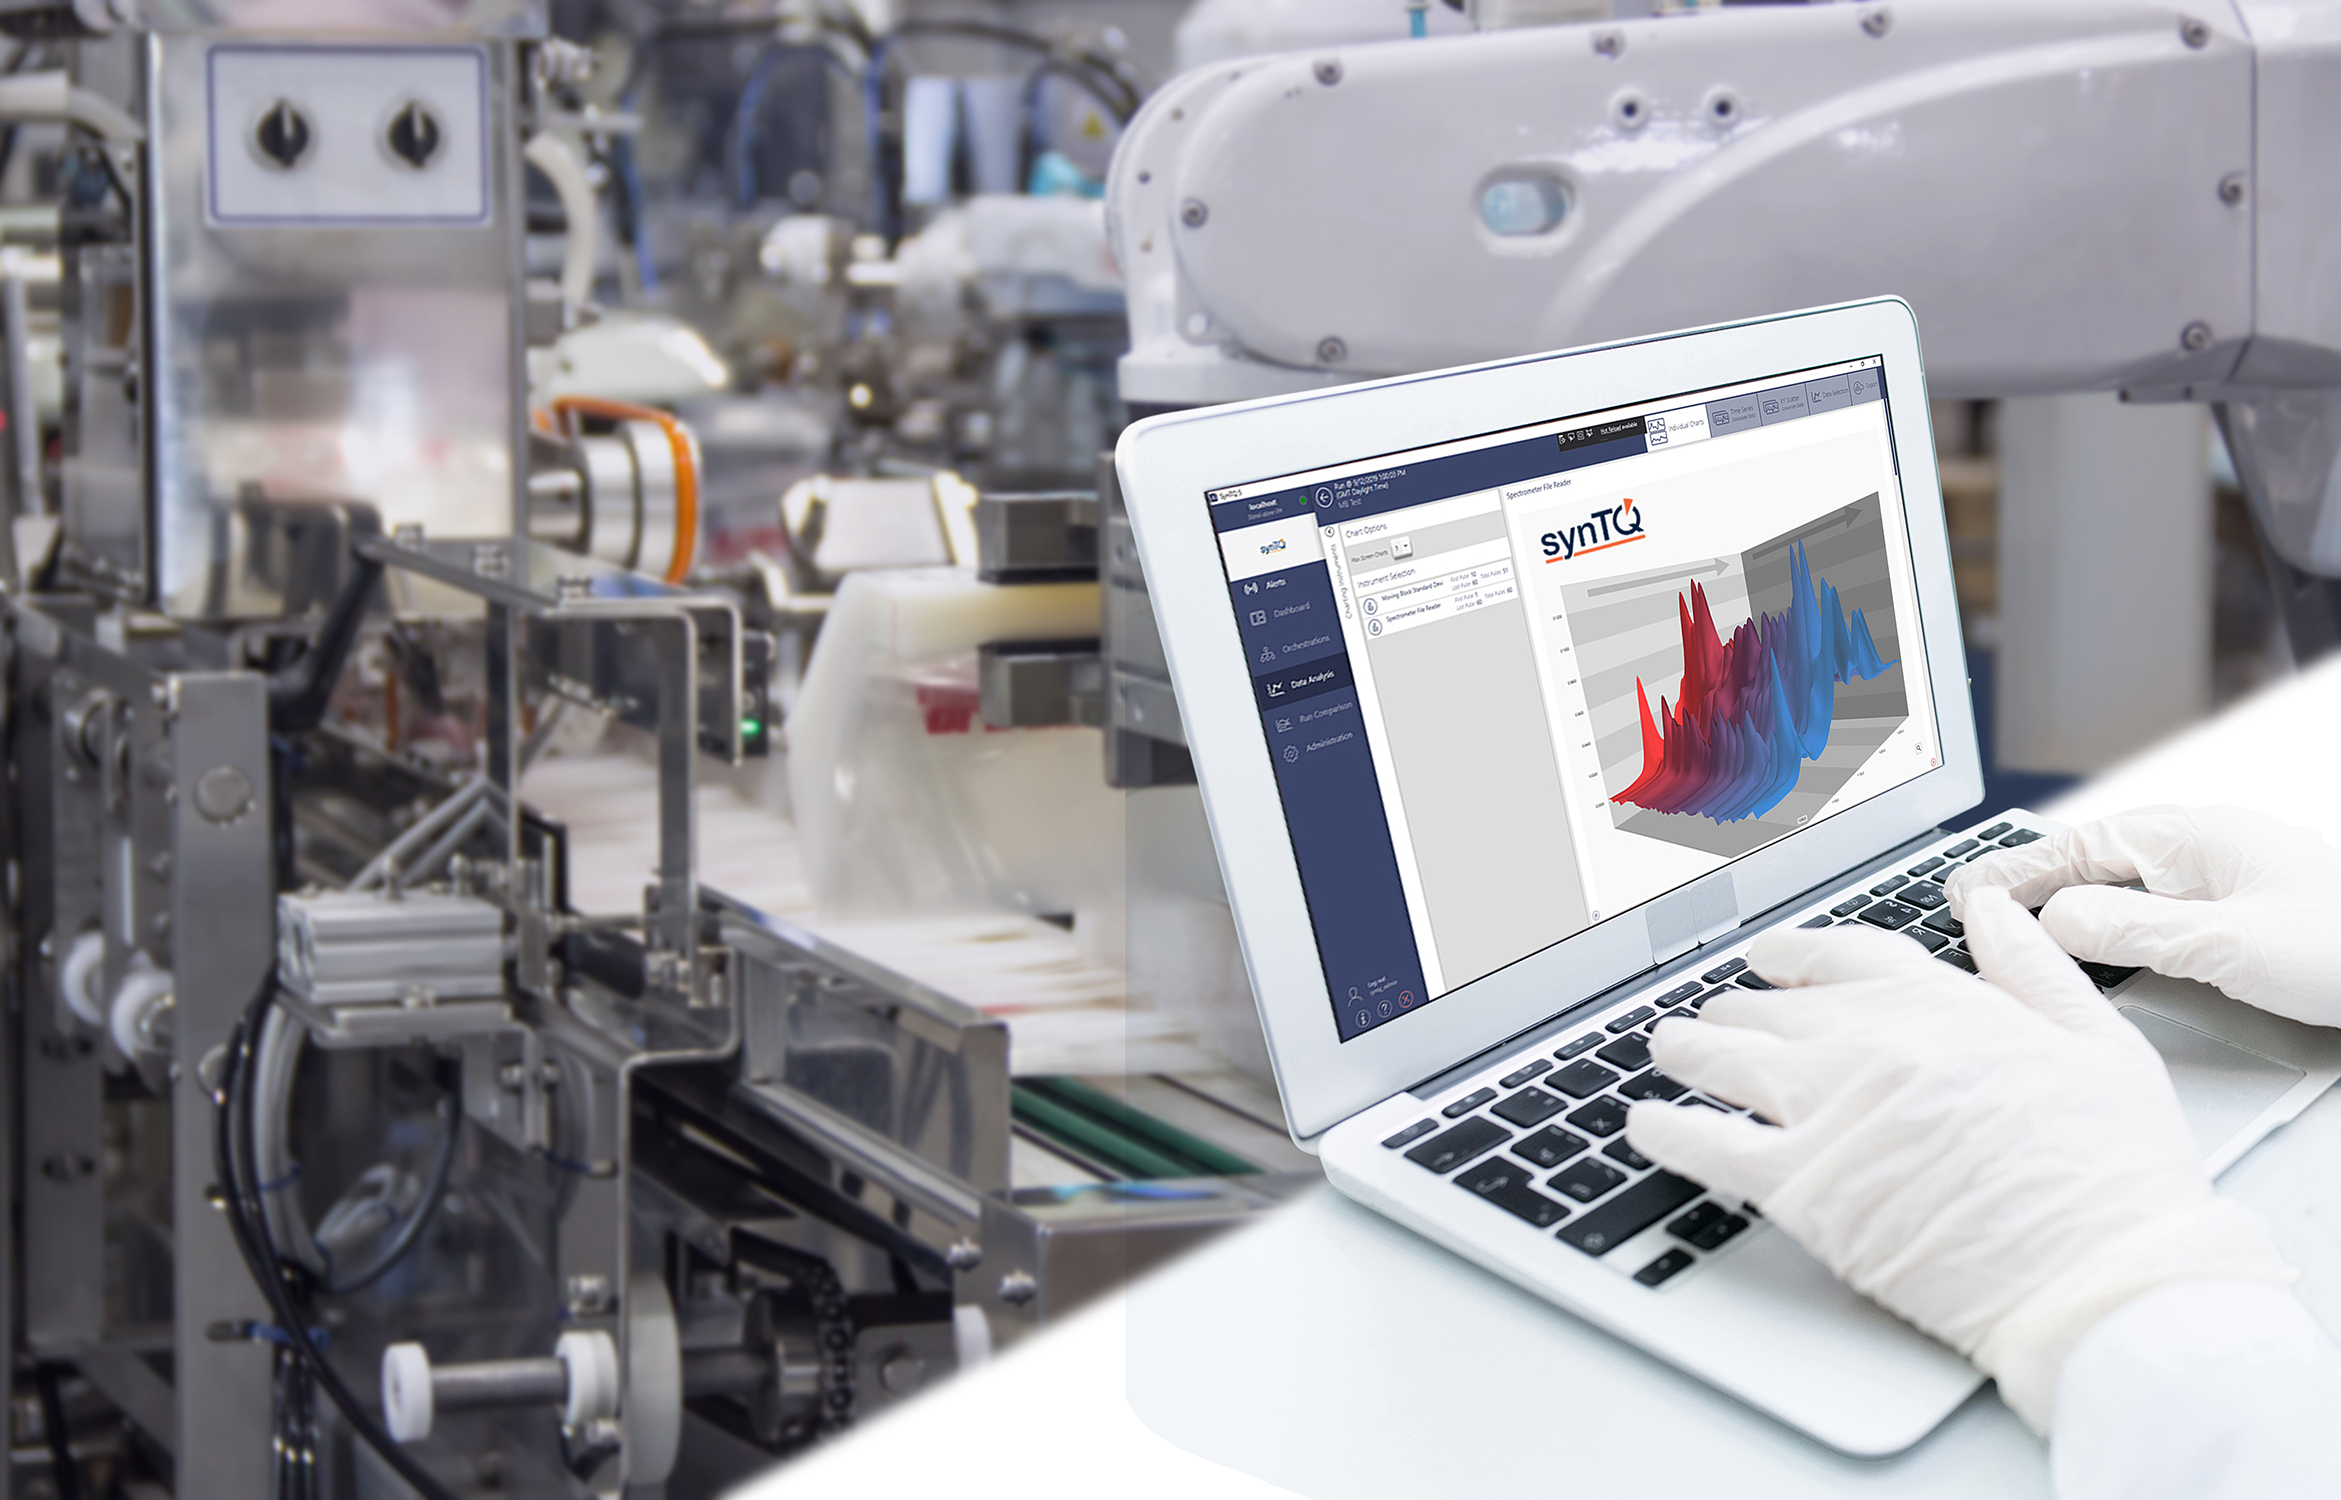 PAT-driven automation can help businesses succeed in smart manufacturing strategies by delivering data-driven actionable insight into production processes.